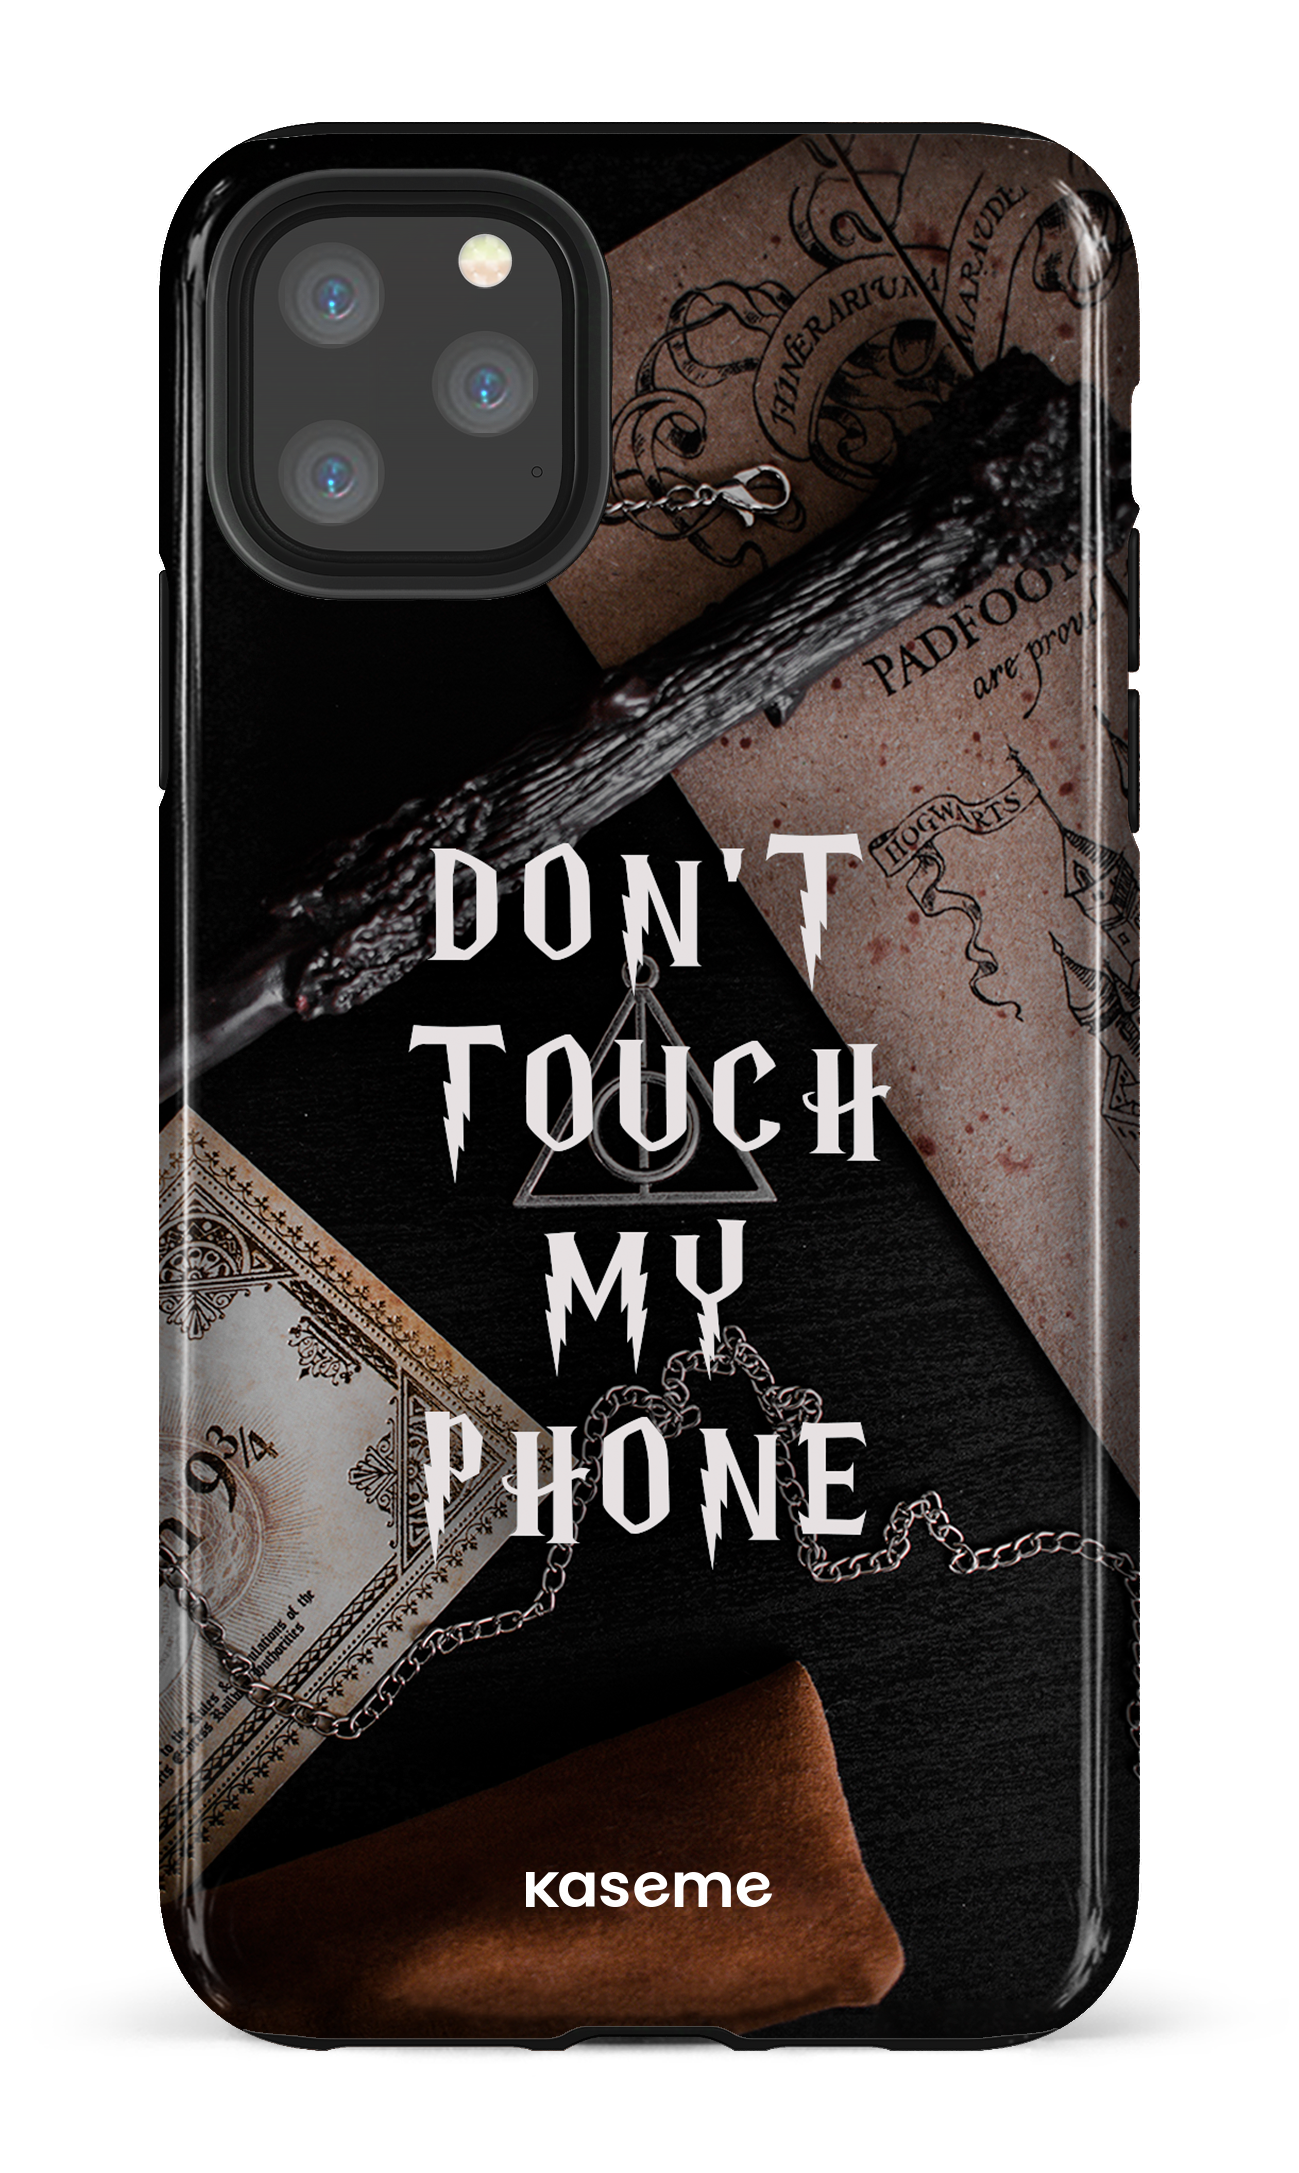 Don't Touch My Phone - iPhone 11 Pro Max